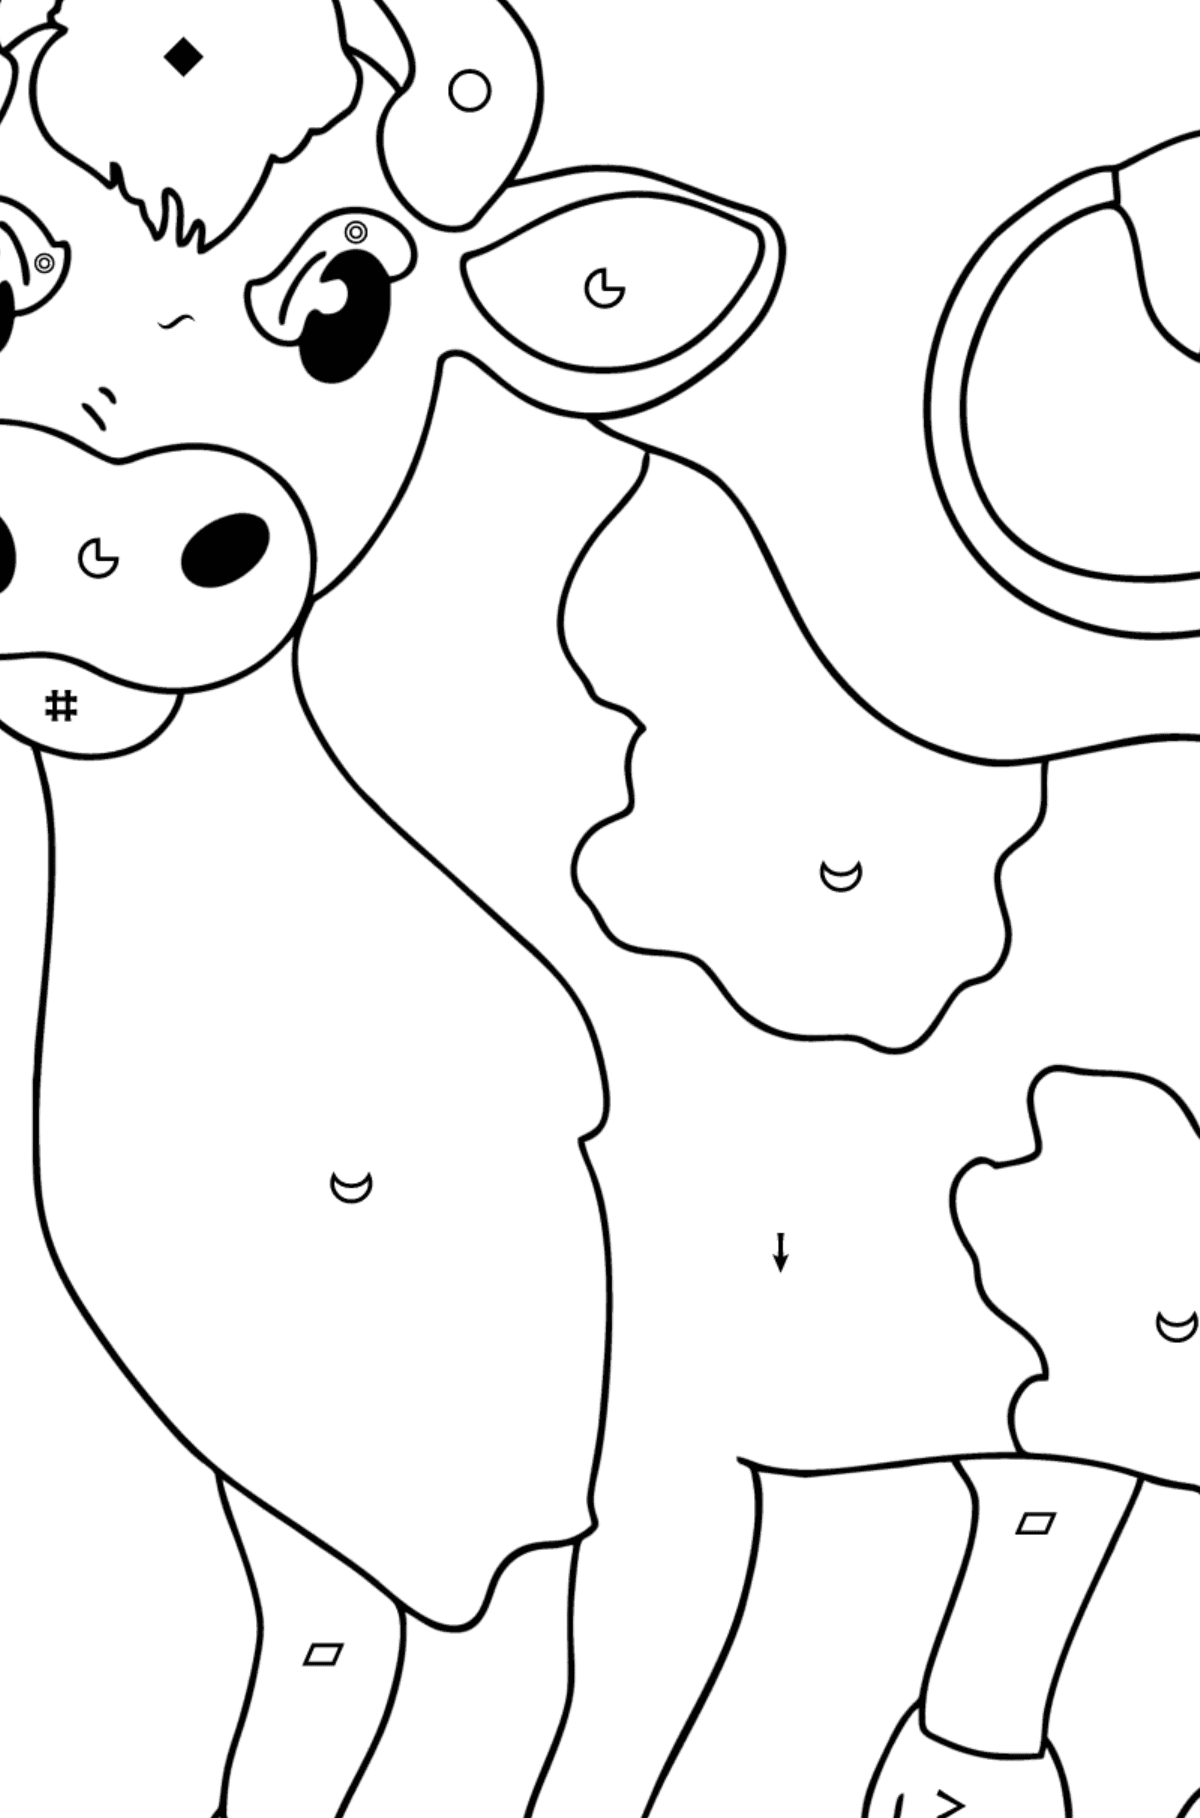 Gray bull coloring page - Coloring by Symbols and Geometric Shapes for Kids